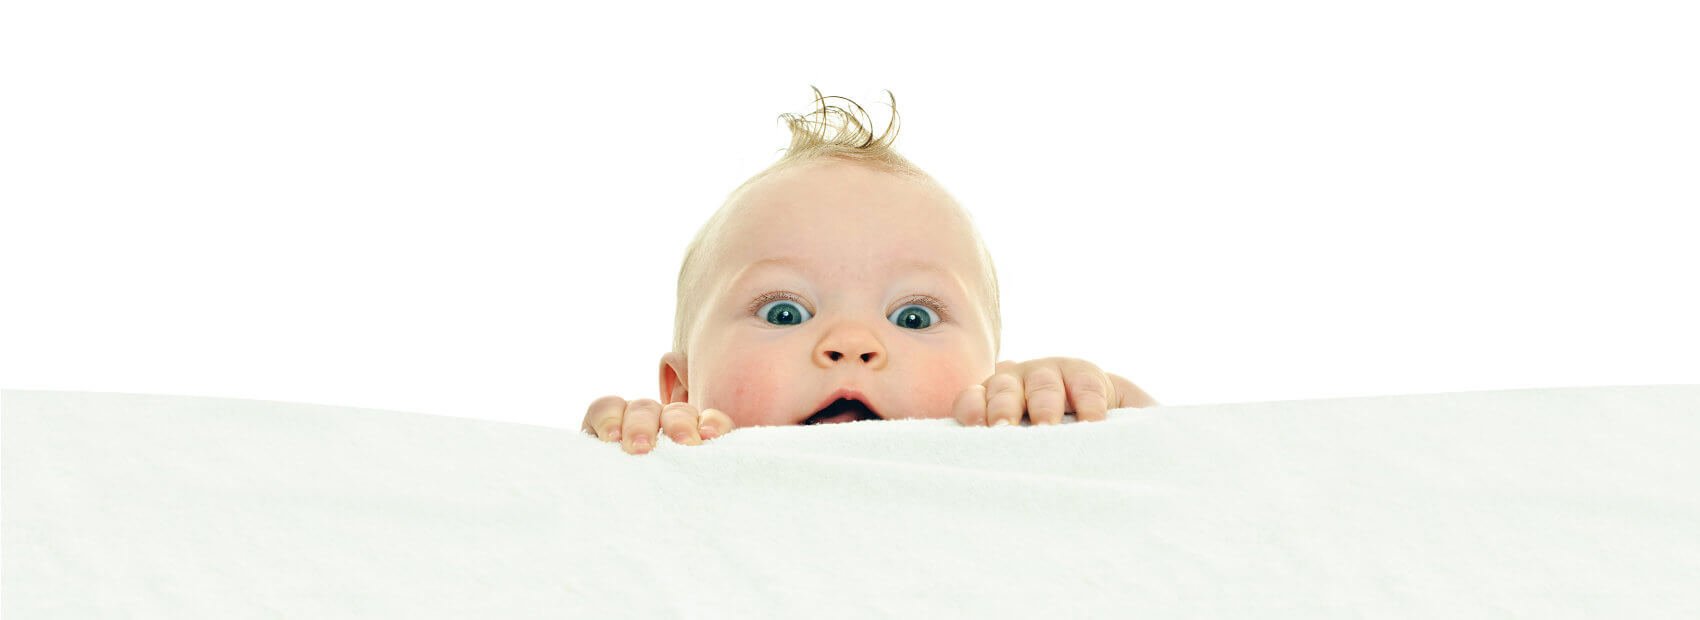 A baby pearing over the top of an object.